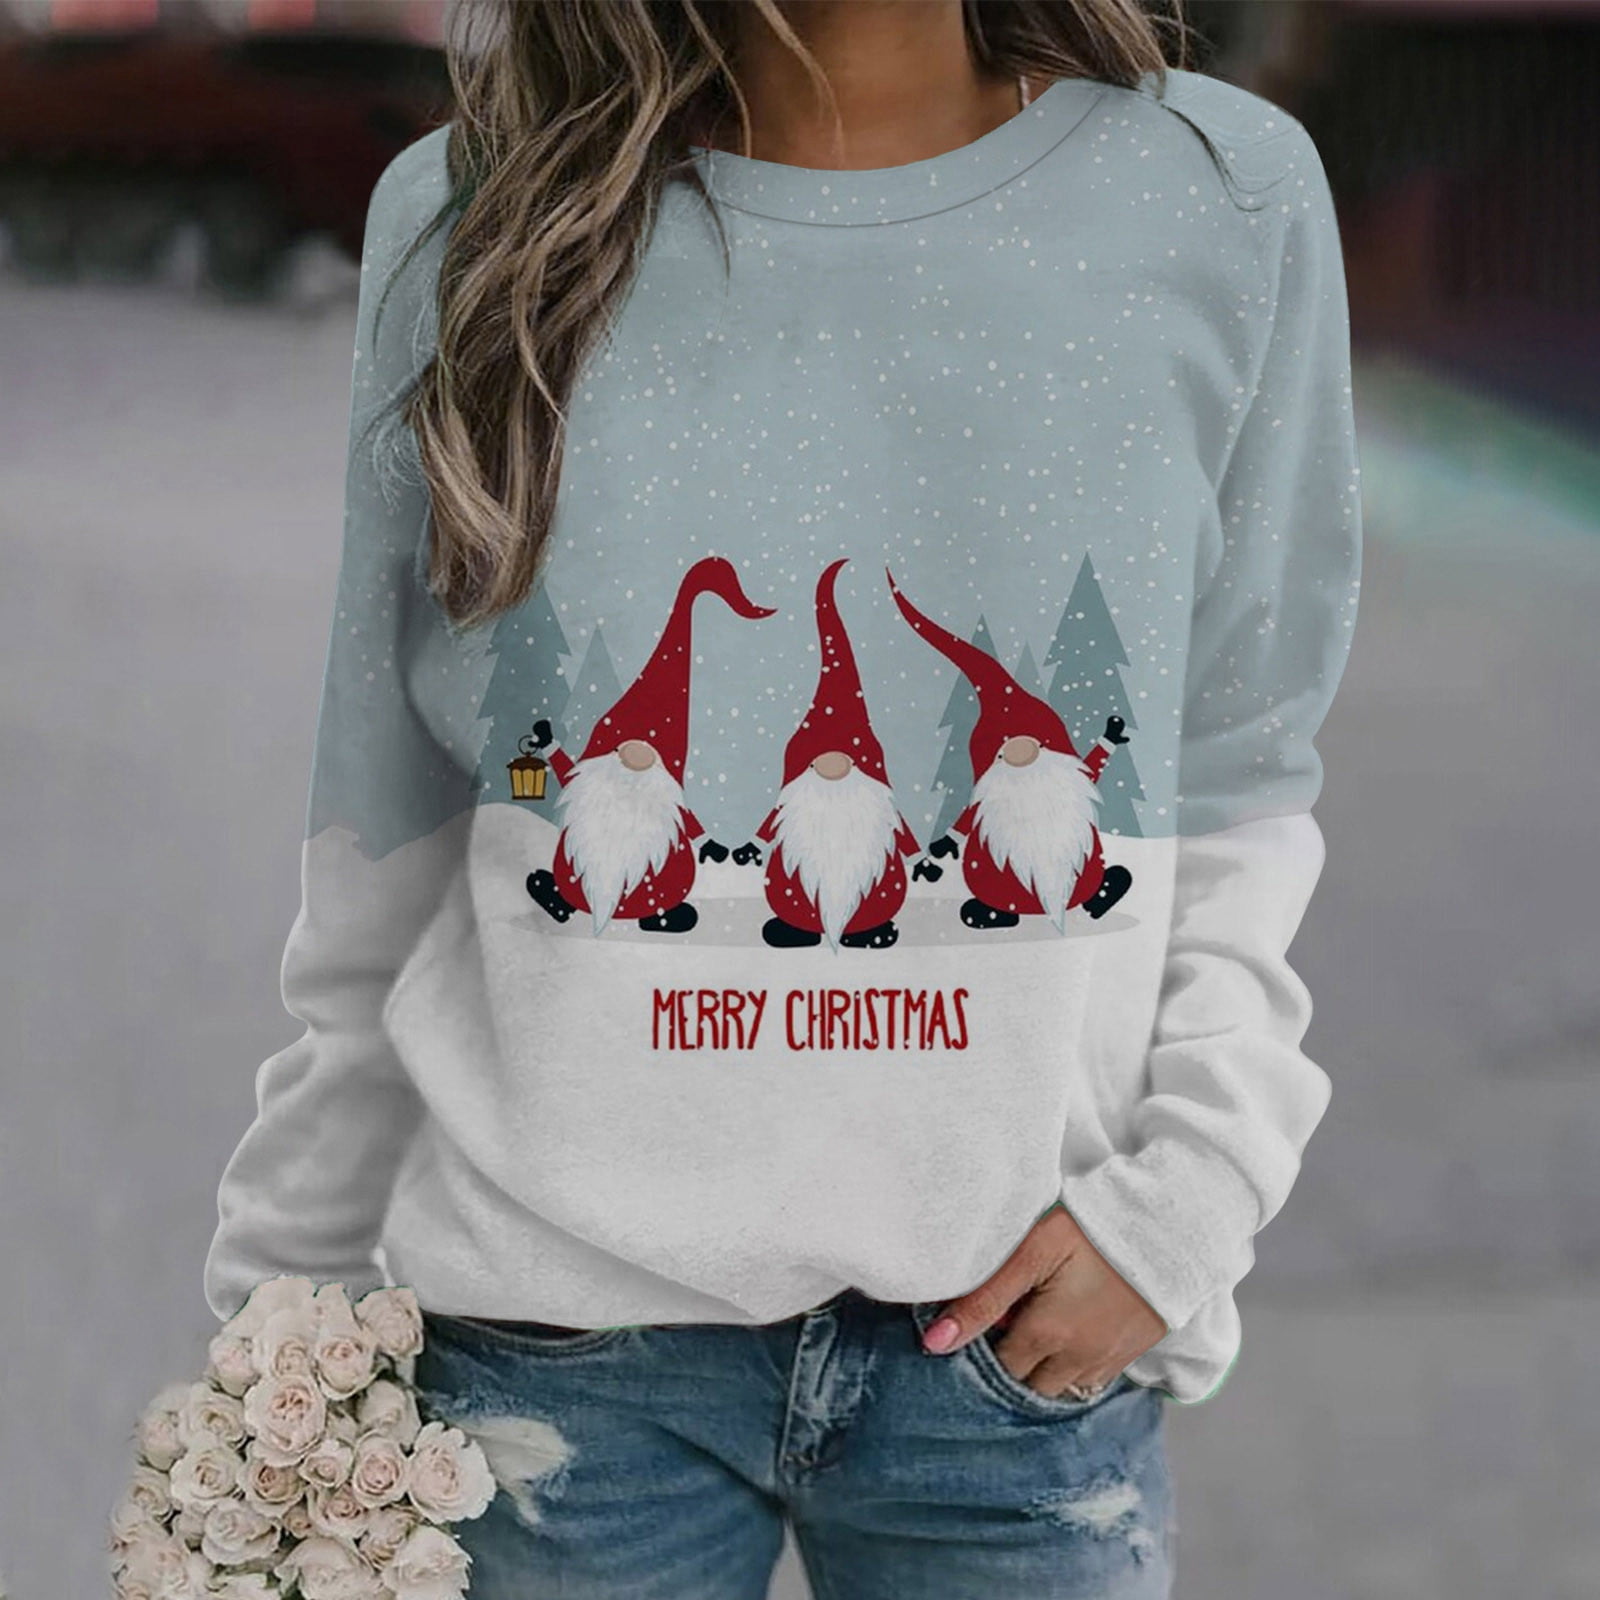 IHGFTRTH Christmas Women And Men Long Sleeve Deer Printed Hoodies  Drawstring,under 15 dollar items,womens plus,promo codes for today,womwn's  tops clearance